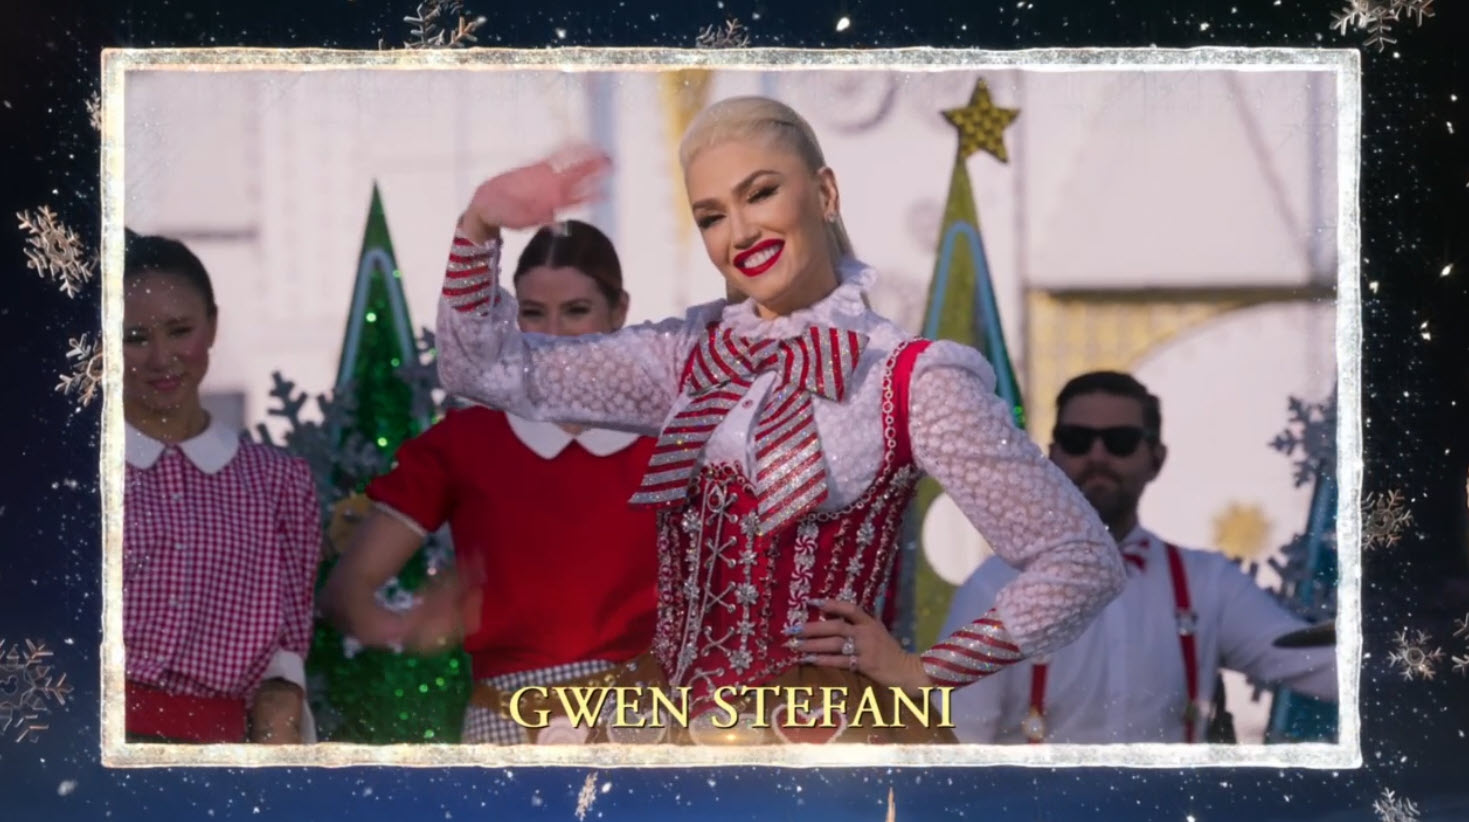 2021 Disney Parks Magical Christmas Day Parade Gwen Stefani – “Cheer for the Elves”